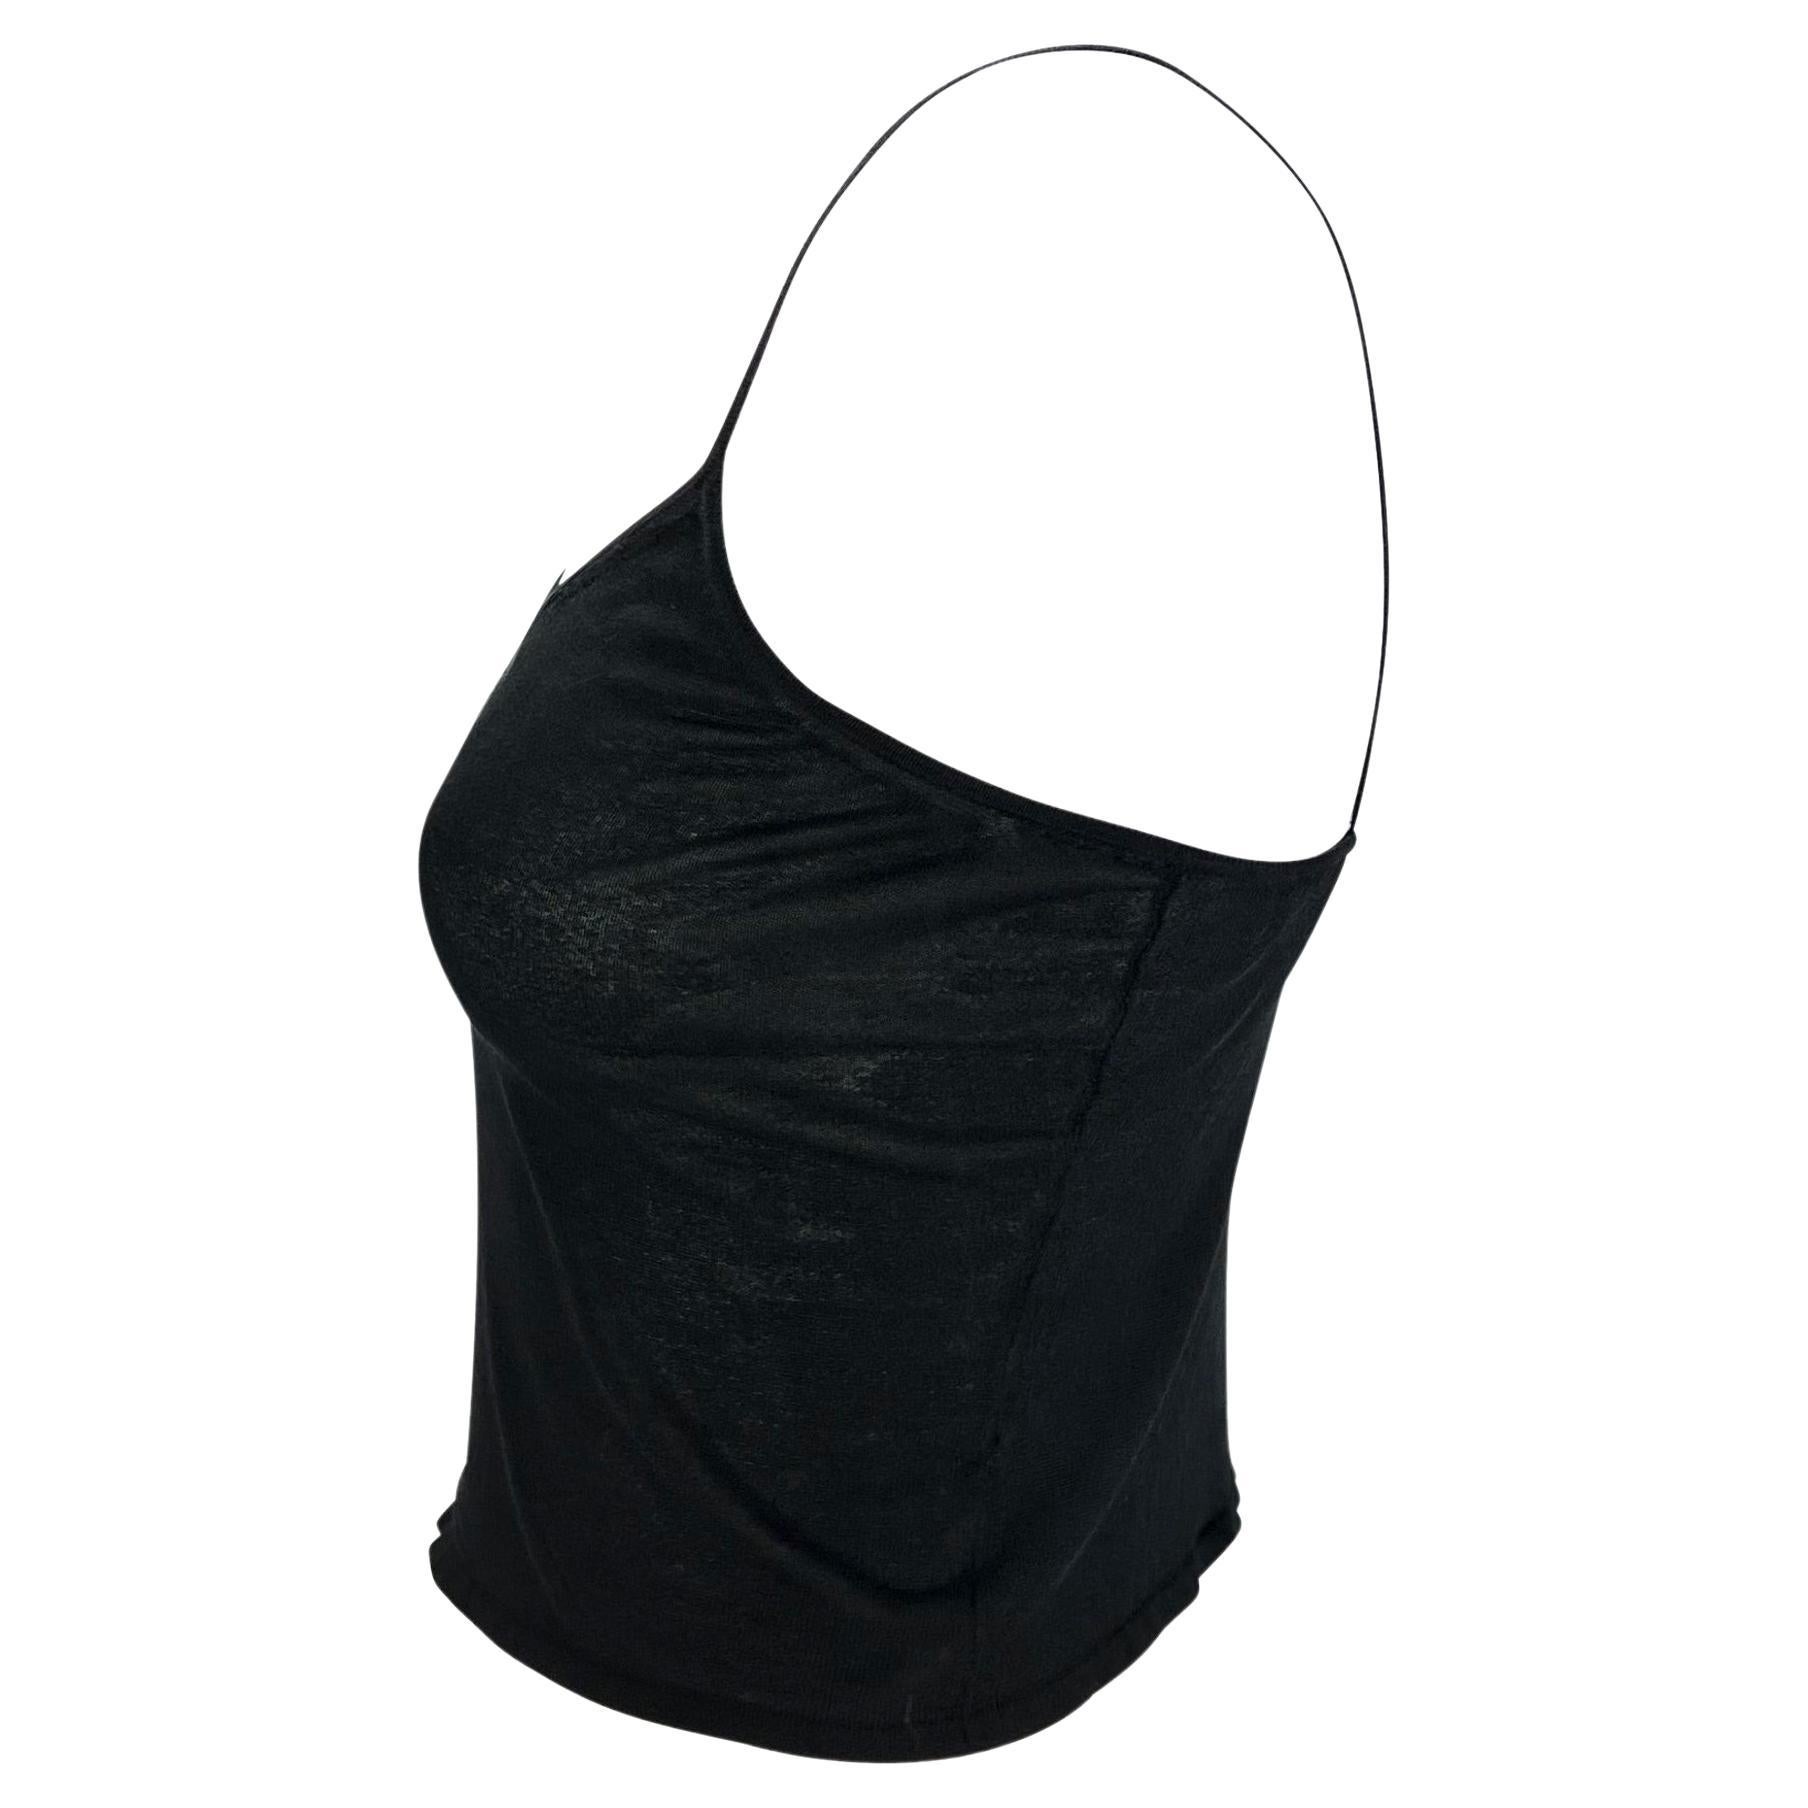 TheRealList presents: a sexy black cropped tank top designed by Tom Ford in the early 2000s for Gucci. The knit fabric stretches to perfectly hug the body and is sheer enough to reveal peeks of the wearer's body. This piece is a chic example of